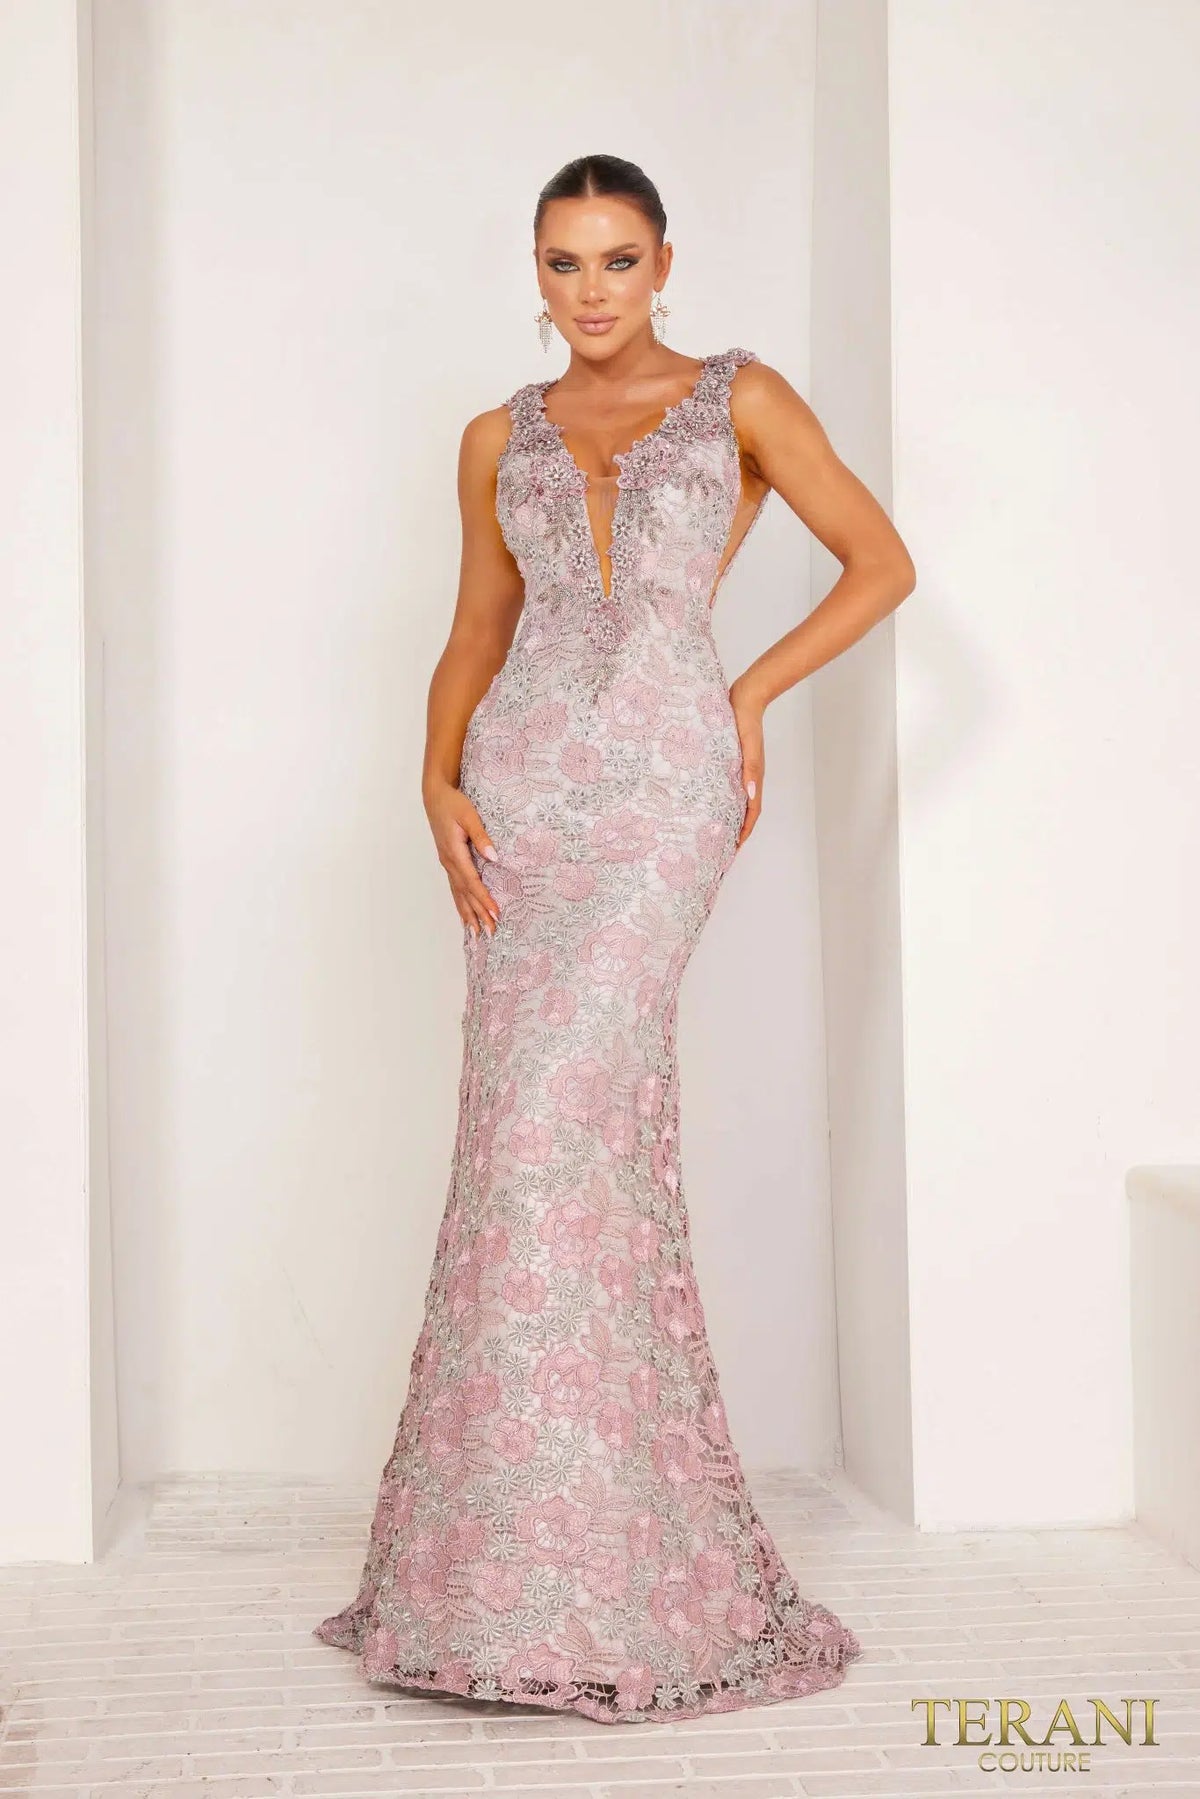 Terani 241E2410 - A sparkling rose floral embroidery trumpet evening gown, perfect for making a sophisticated statement at special events.